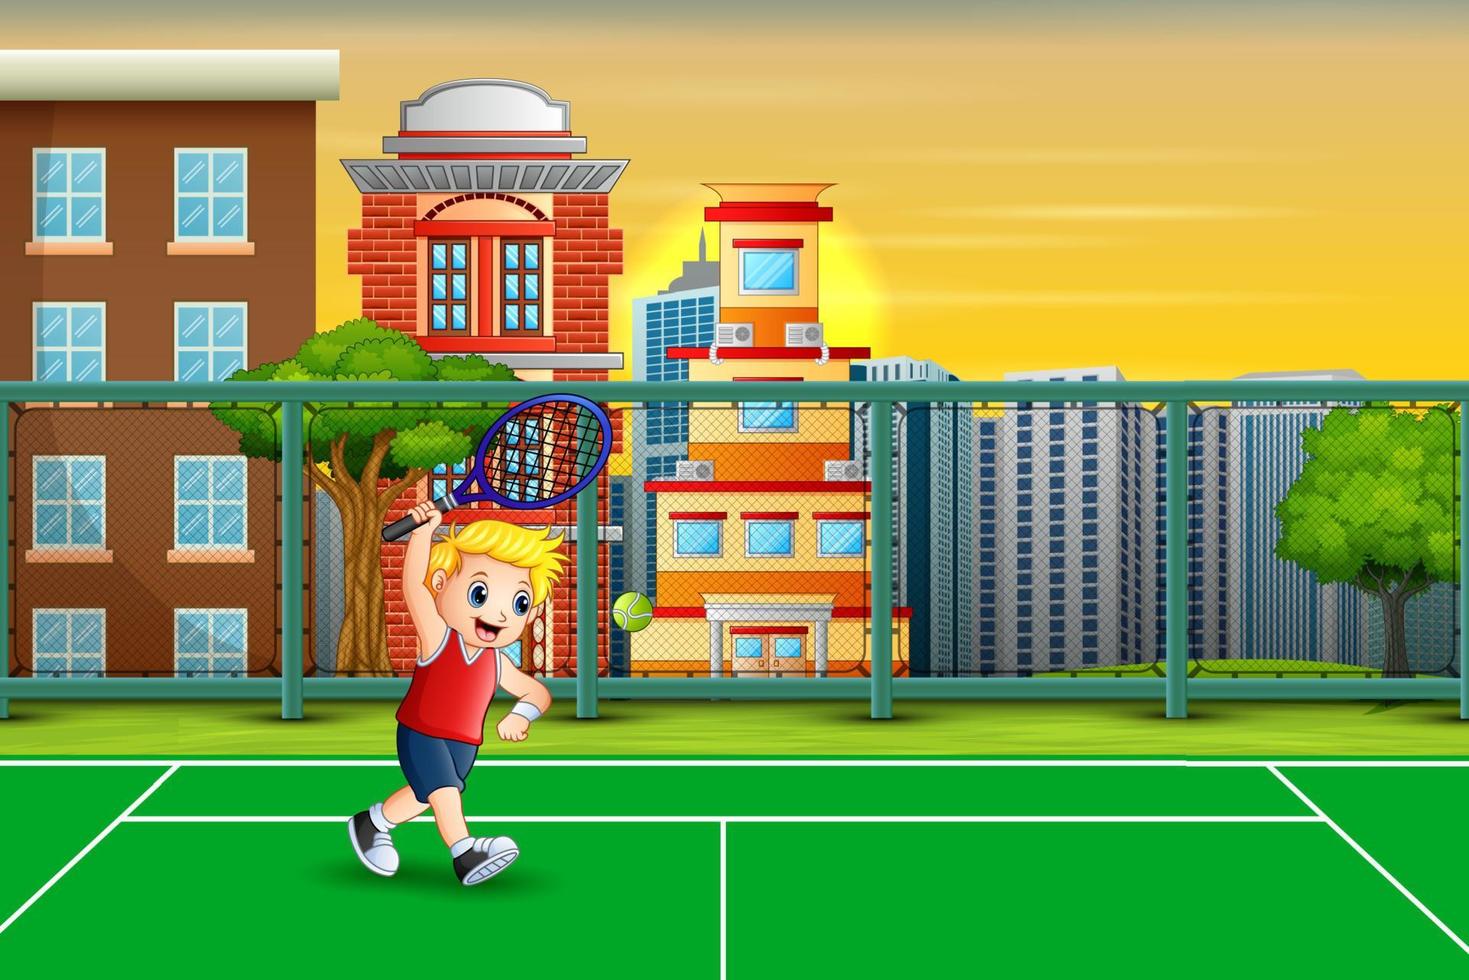 Cartoon a boy playing tennis at the court vector